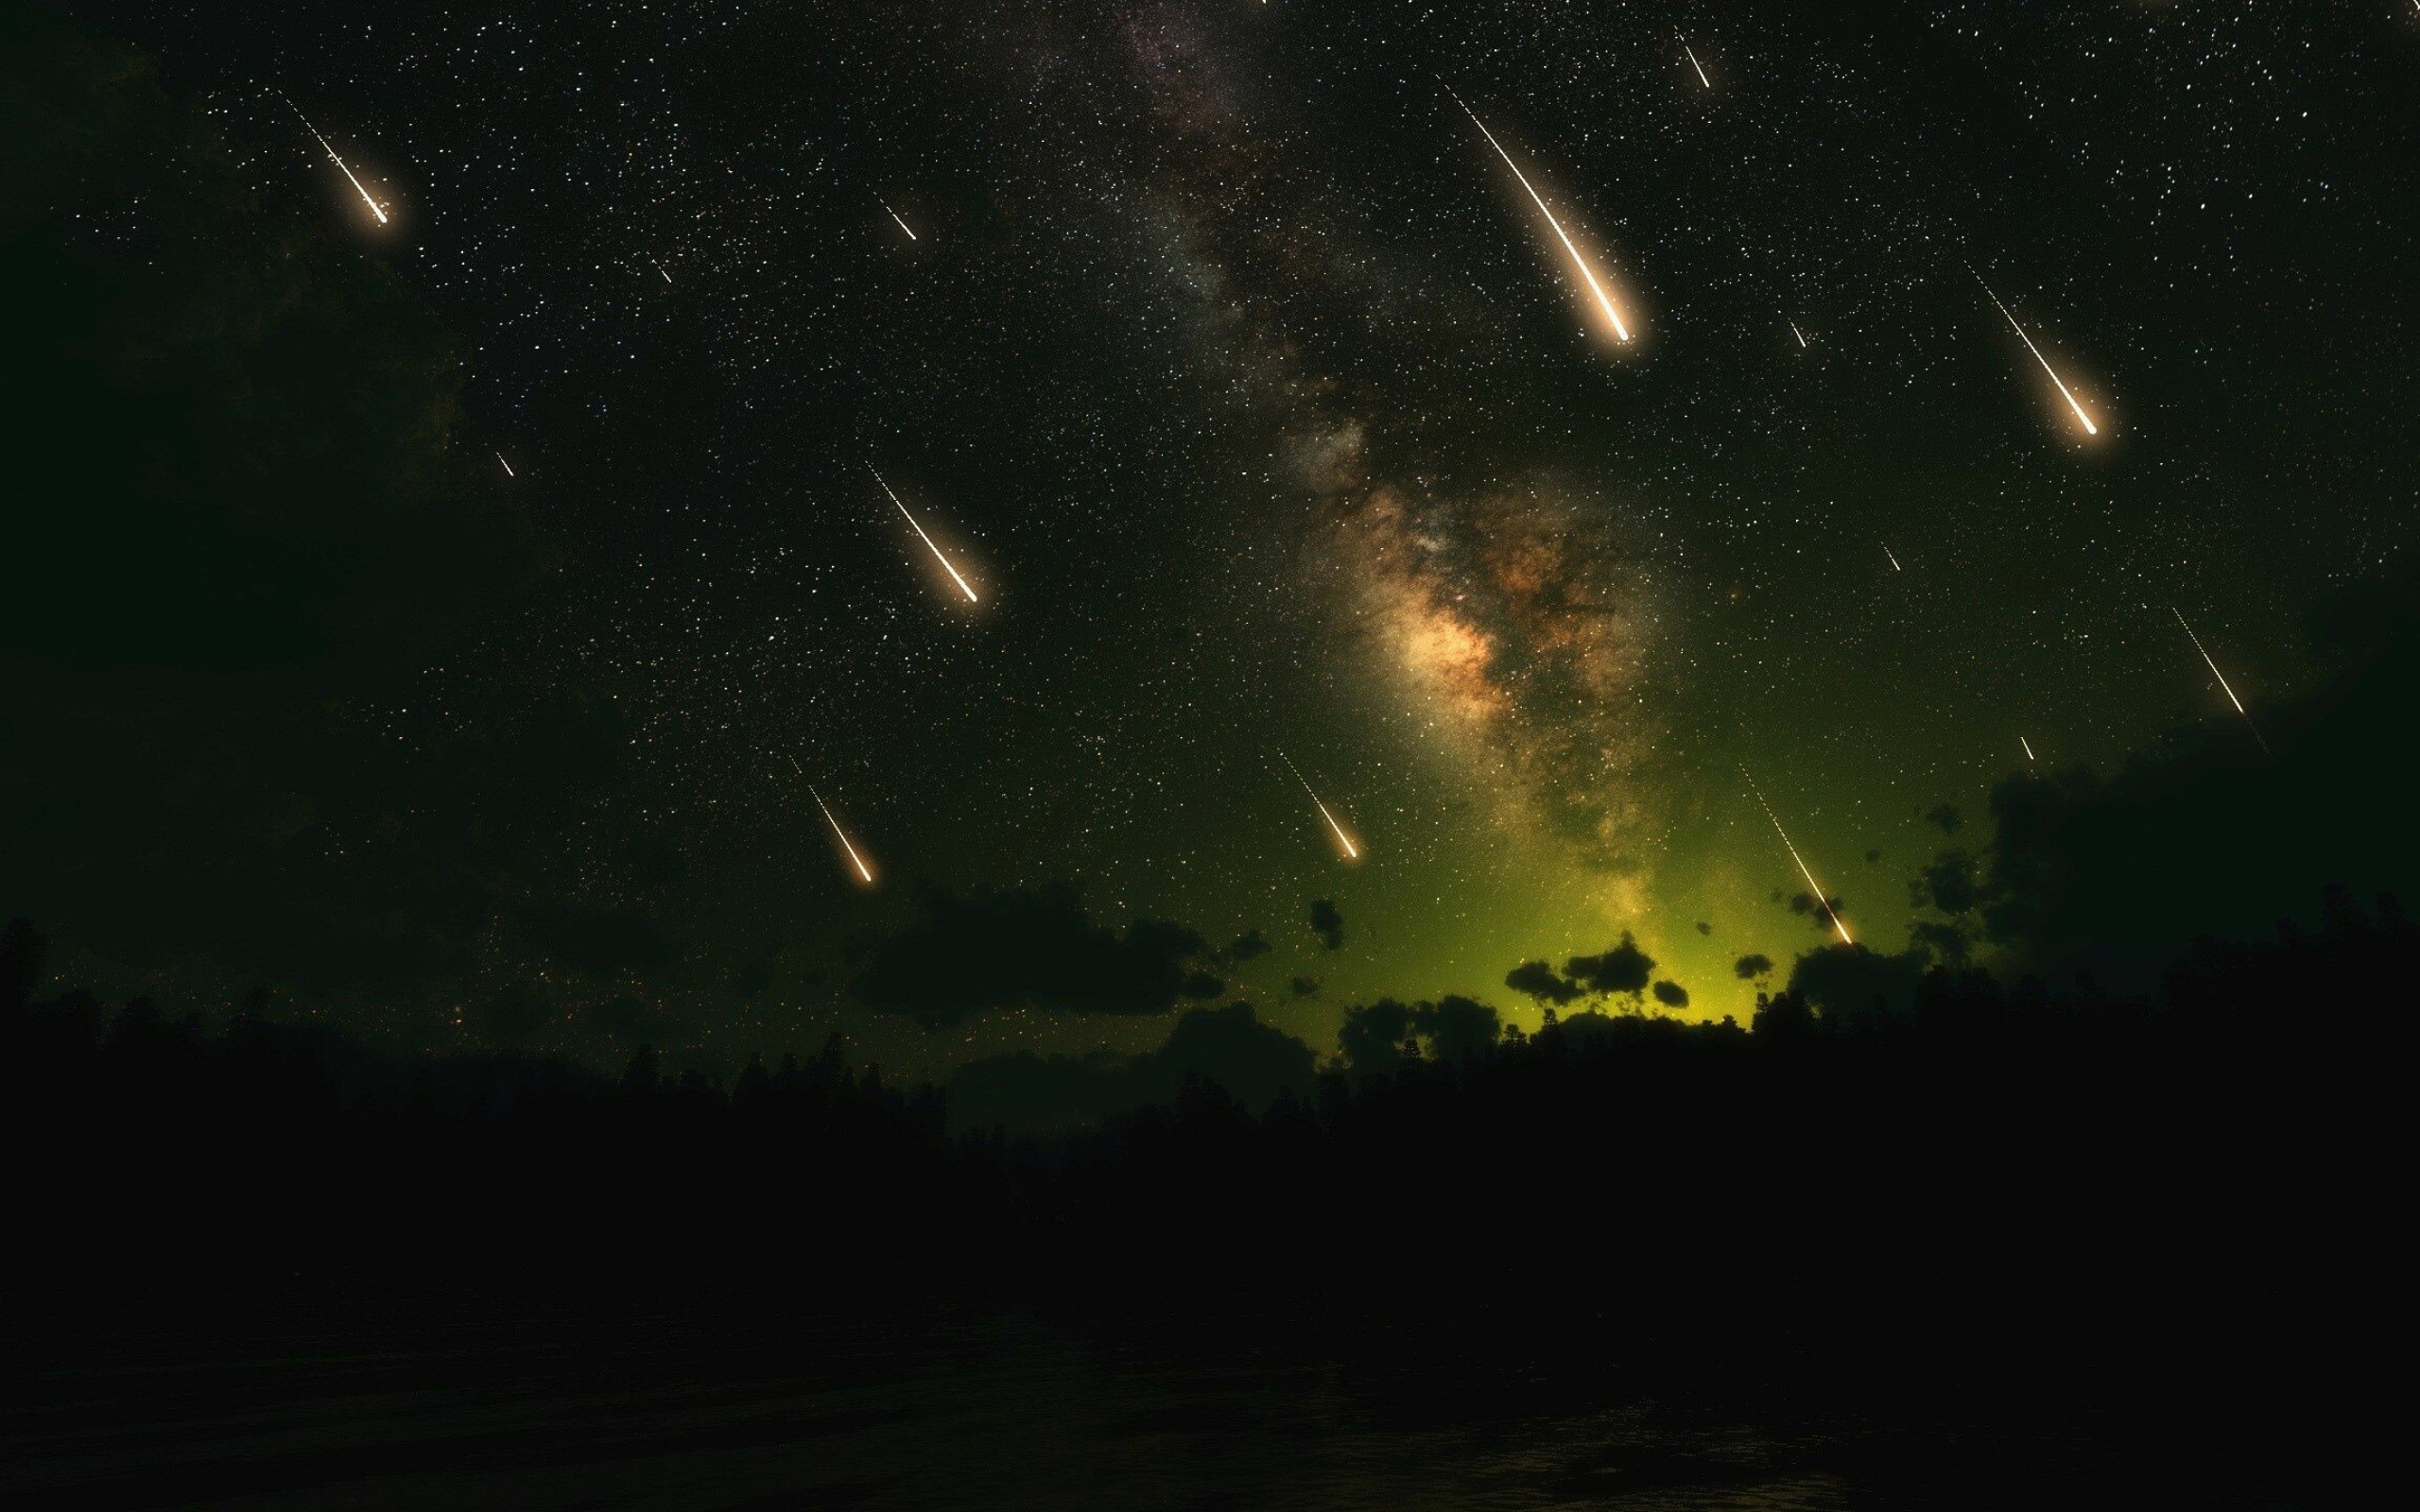 Meteor: A transient fiery streak in the sky produced by a meteoroid passing through the earth's atmosphere. 2560x1600 HD Wallpaper.